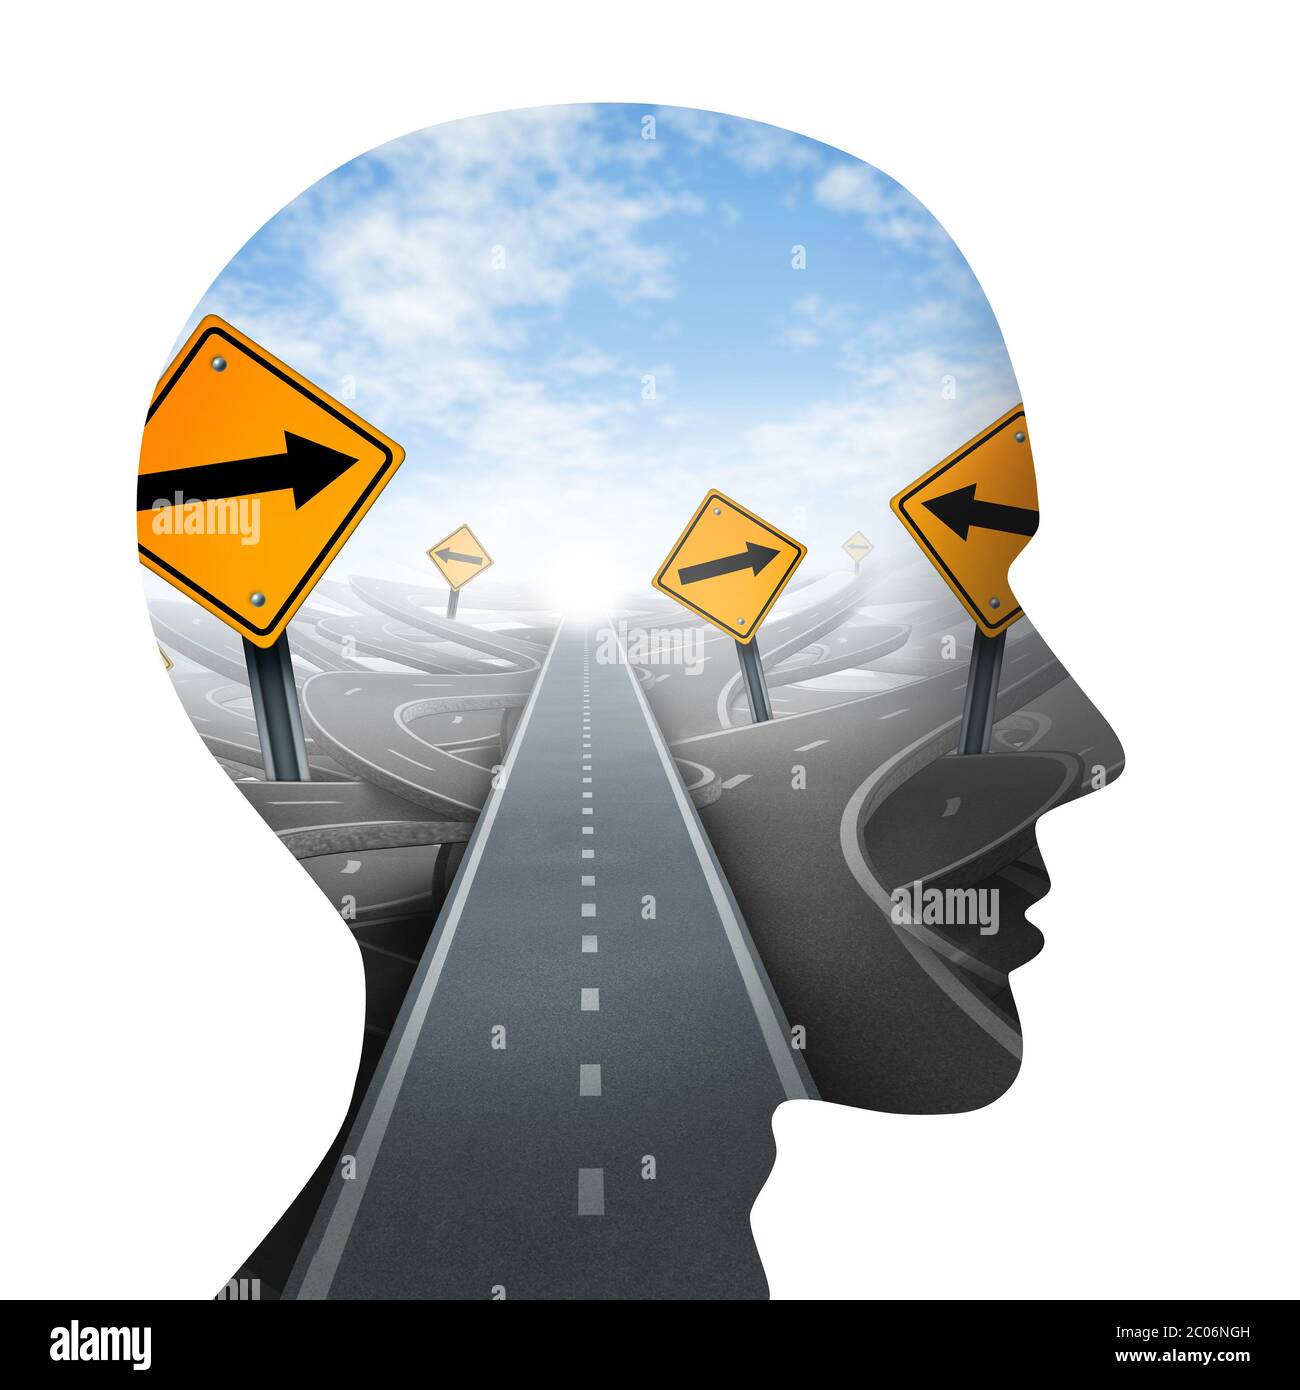 Think clearly concept and clear business thinking idea as a corporate  success mindset or psychology symbol for mind focus and goal setting Stock  Photo - Alamy